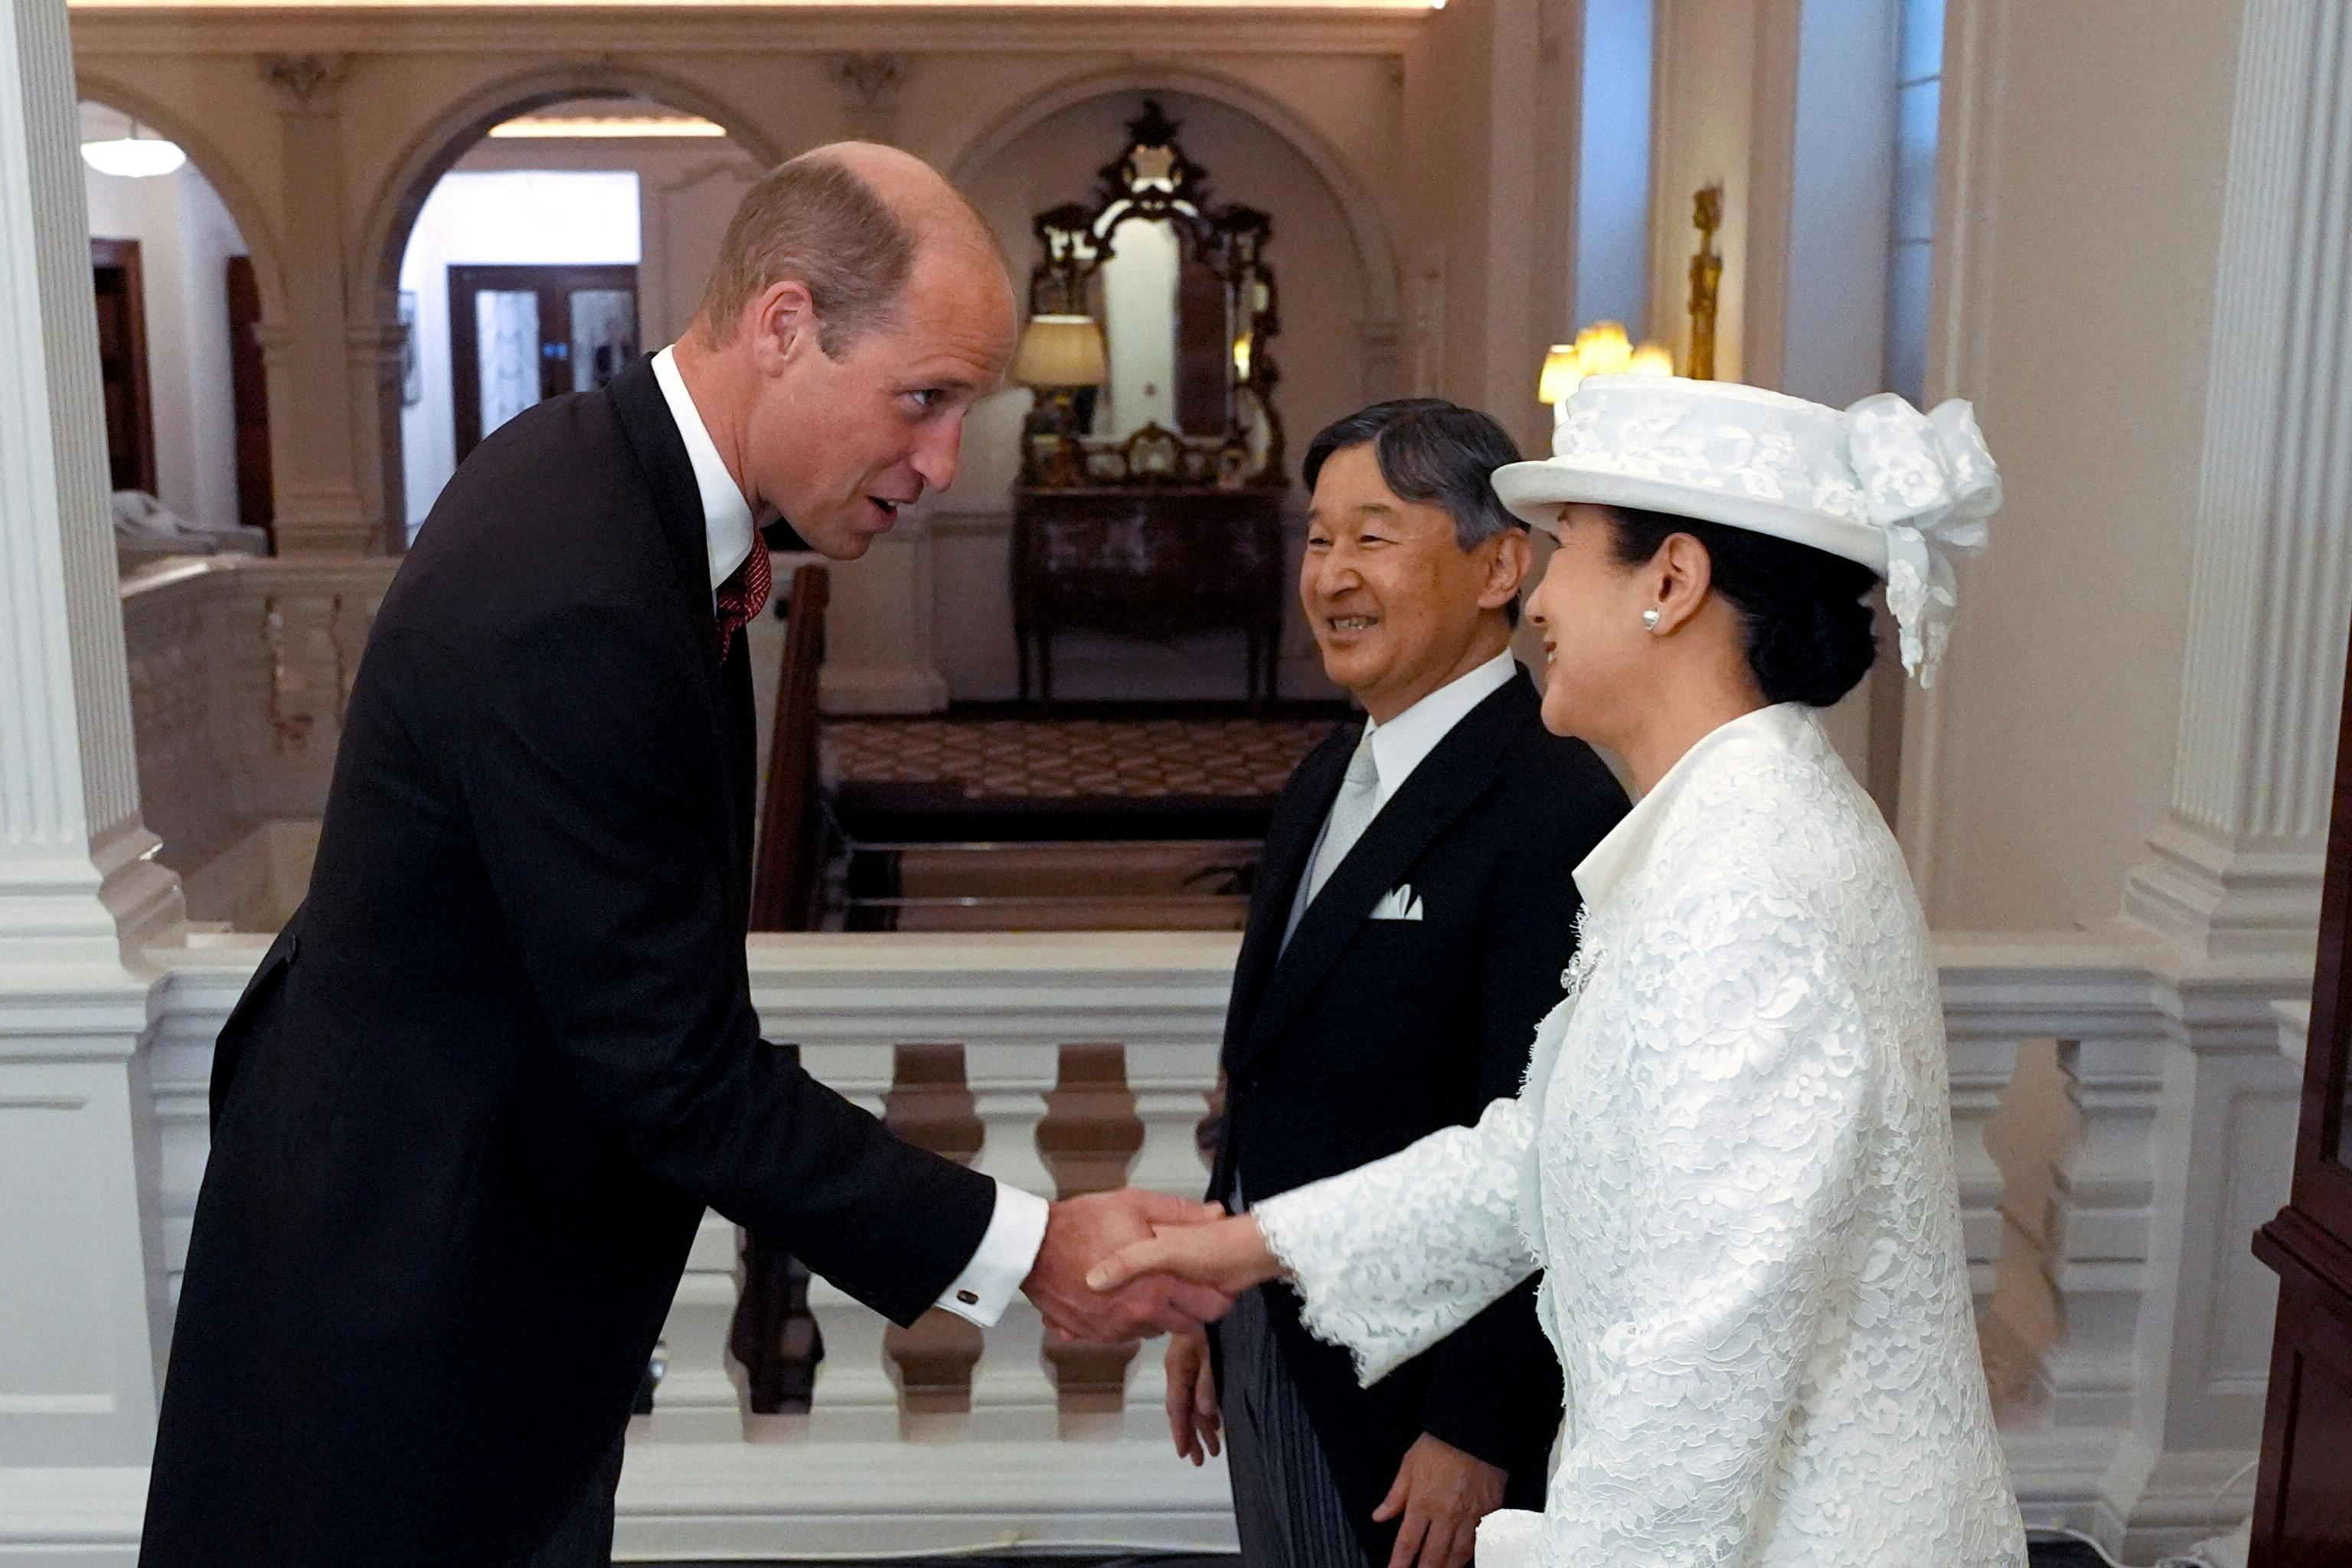 Britain's Prince William greets Empress Masako and Emperor Naruhito of Japan at their hotel in London, on behalf of the King, before the ceremonial welcome at Horse Guards Parade, London, for their state visit to Britain. Jordan Pettitt/Pool via REUTERS